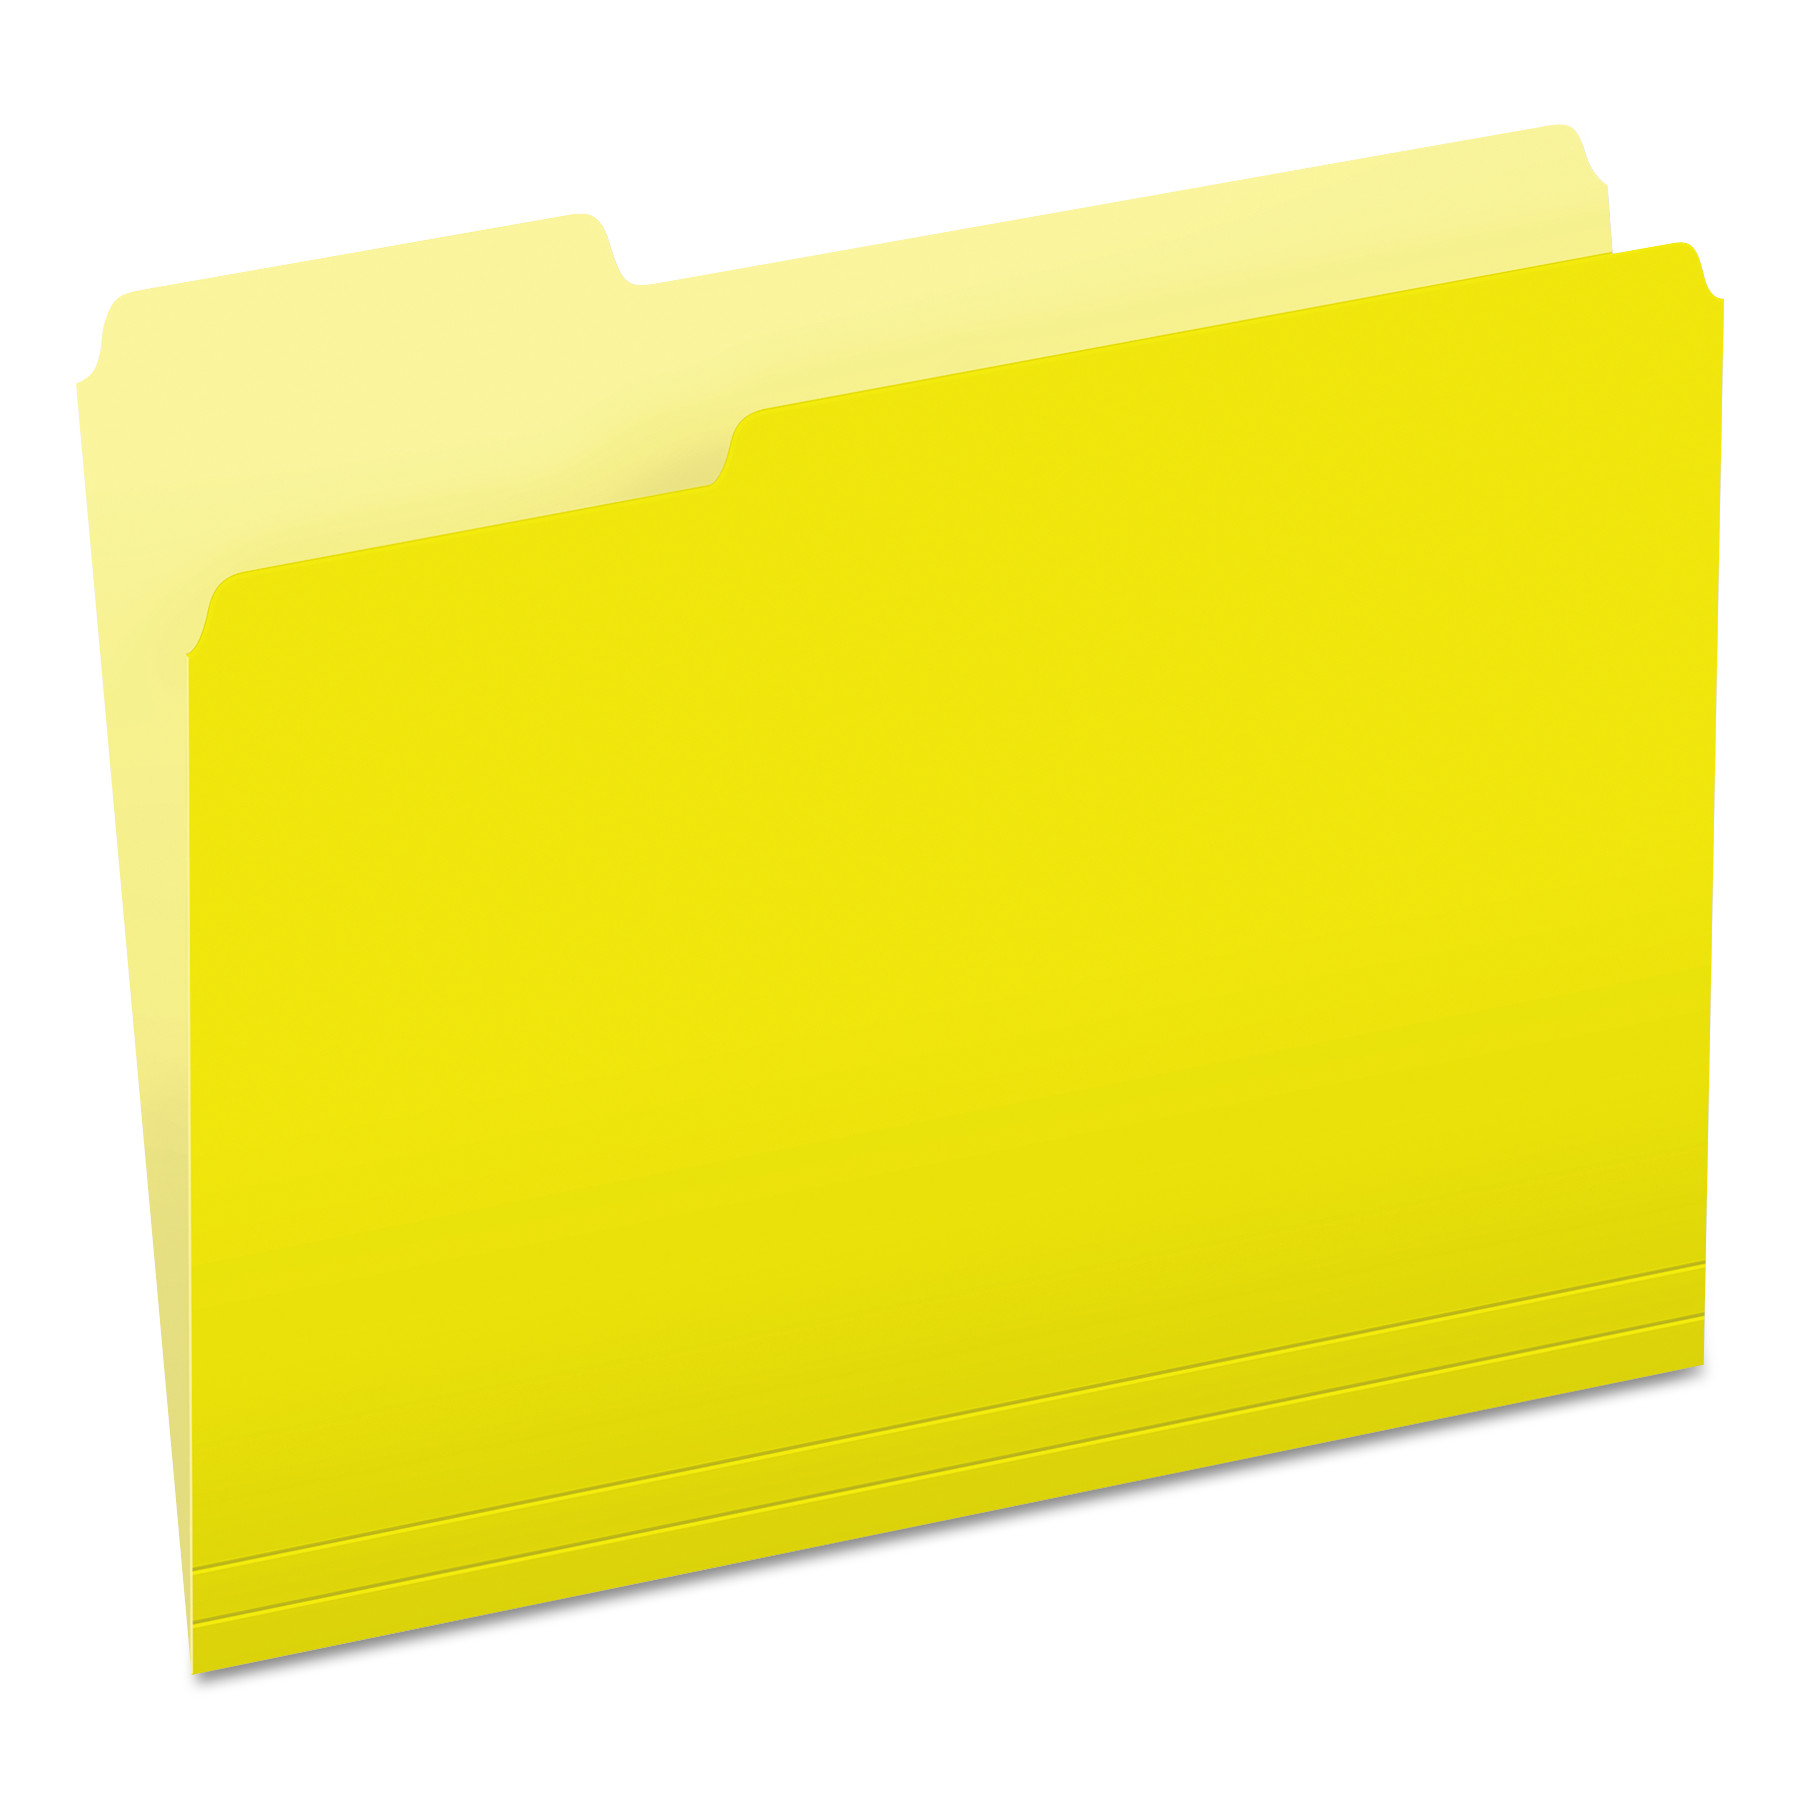  Pendaflex 152 1/3 YEL Colored File Folders, 1/3-Cut Tabs, Letter Size, Yellowith Light Yellow, 100/Box (PFX15213YEL) 